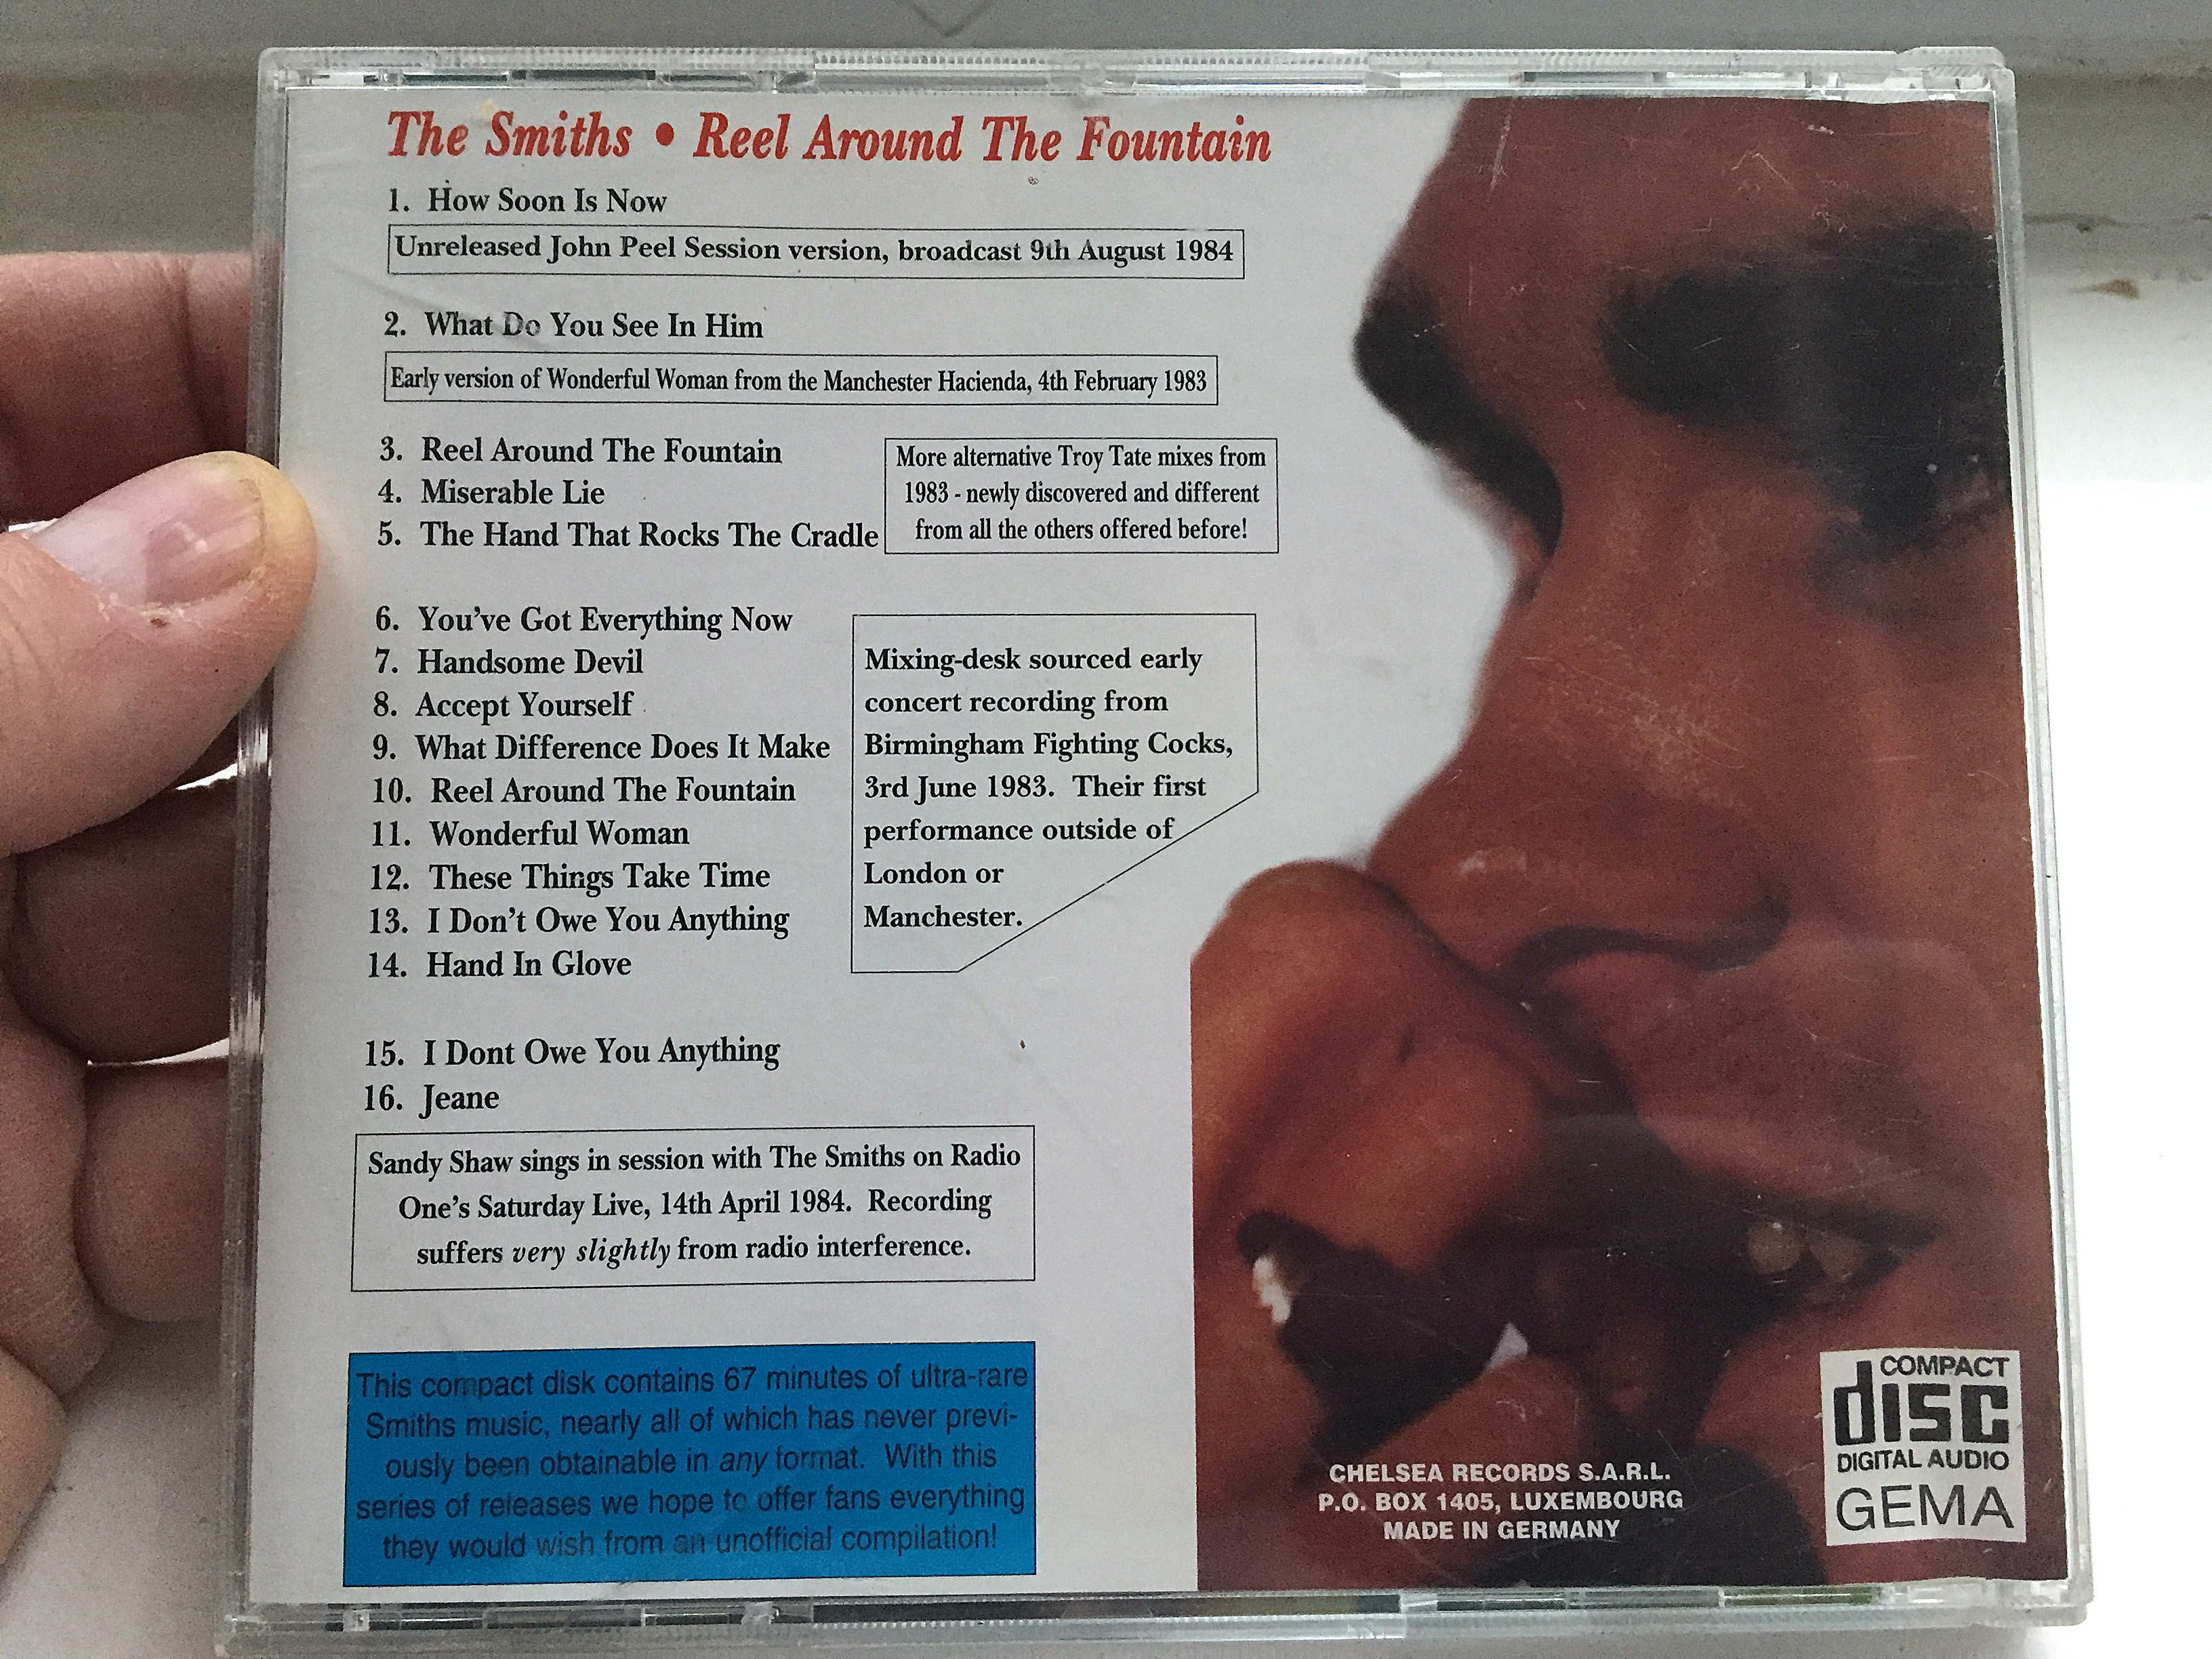 'Reel Around the Fountain' CD track listing.